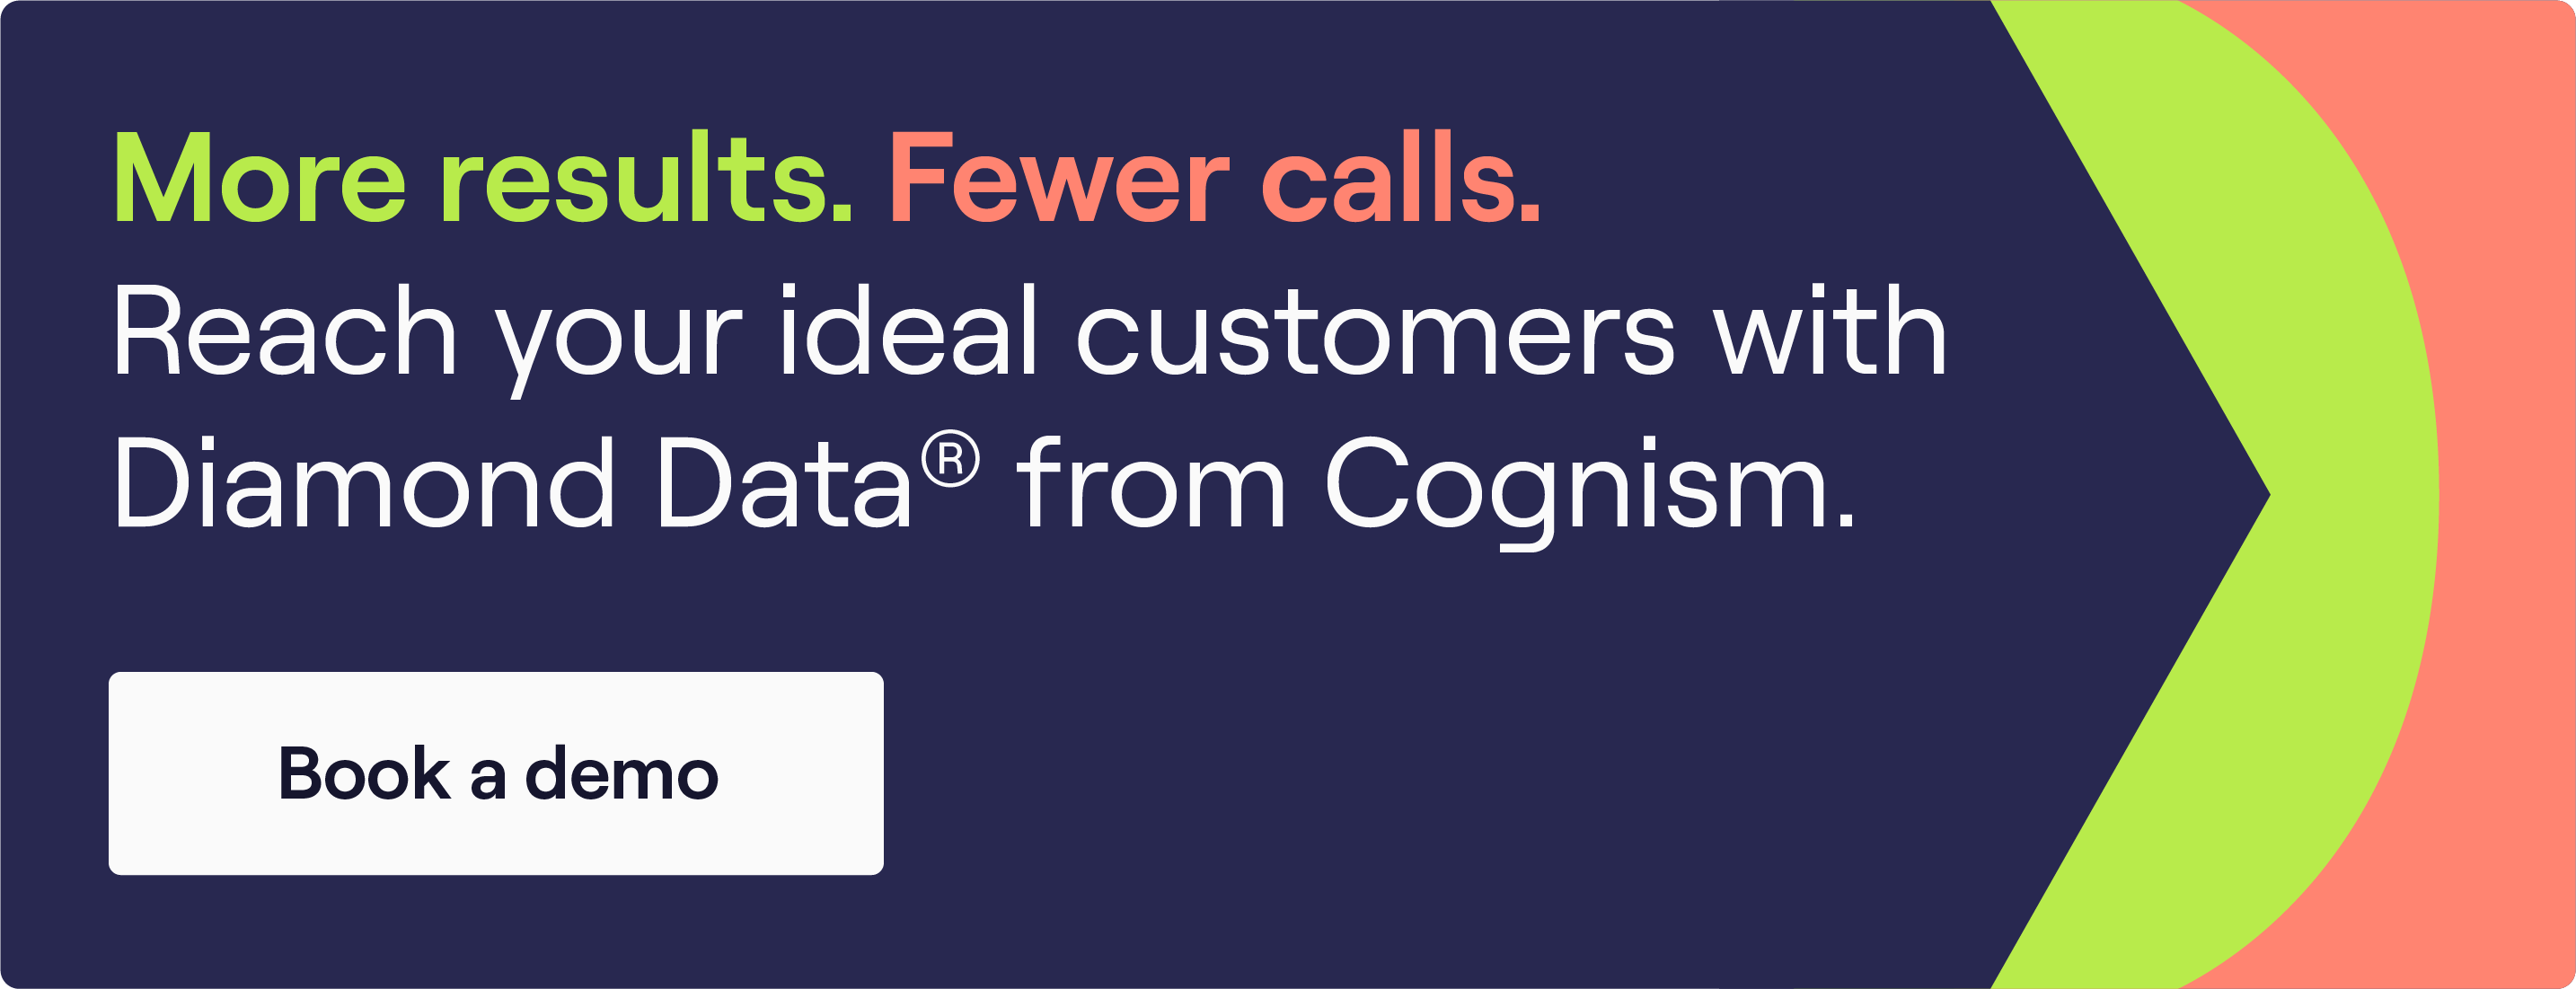 More results. Fewer calls. Reach your ideal customers with Diamond Data® from Cognism. Click to book a demo.